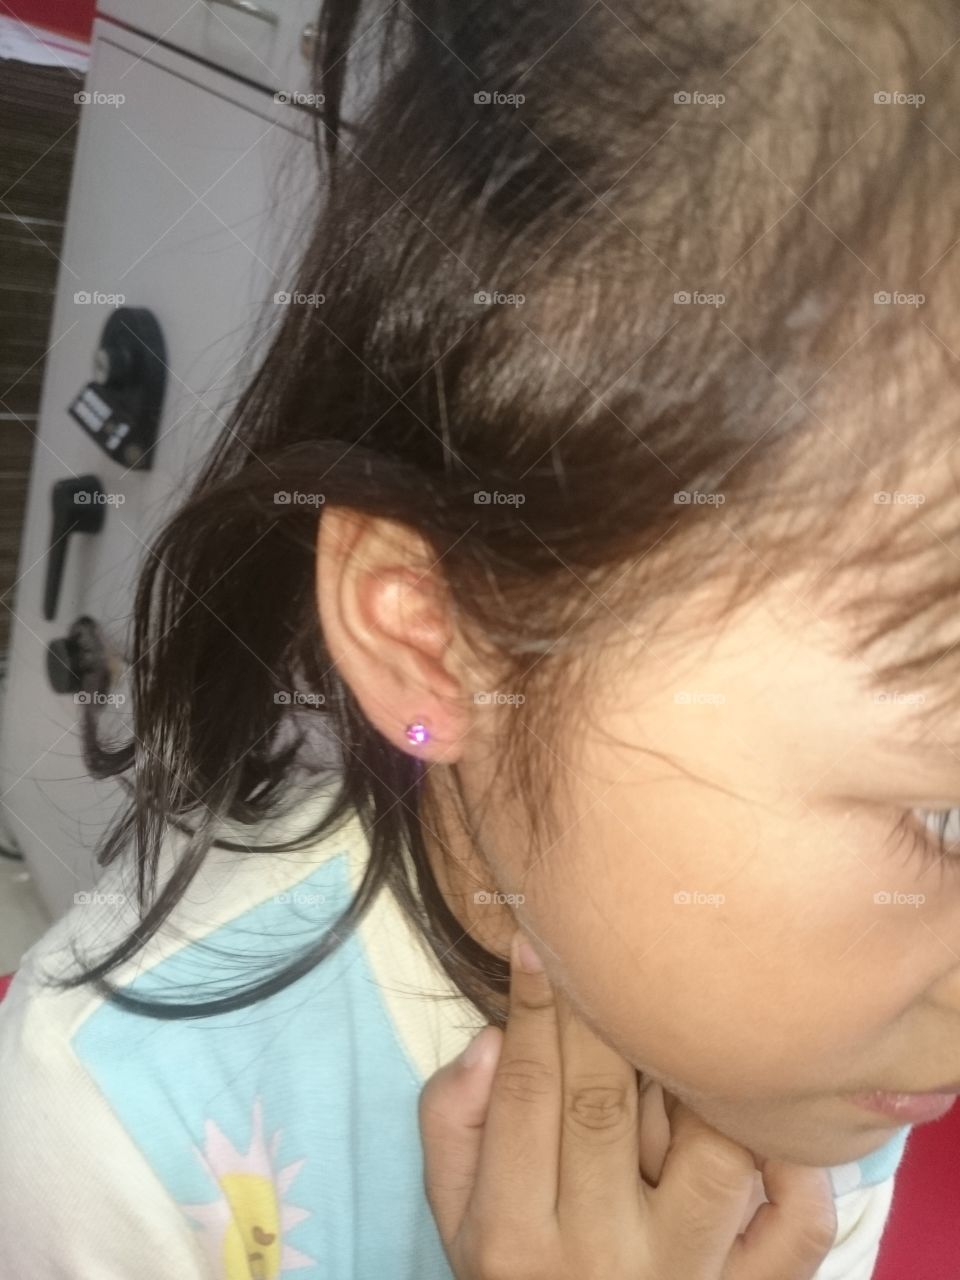 the new earings of the child